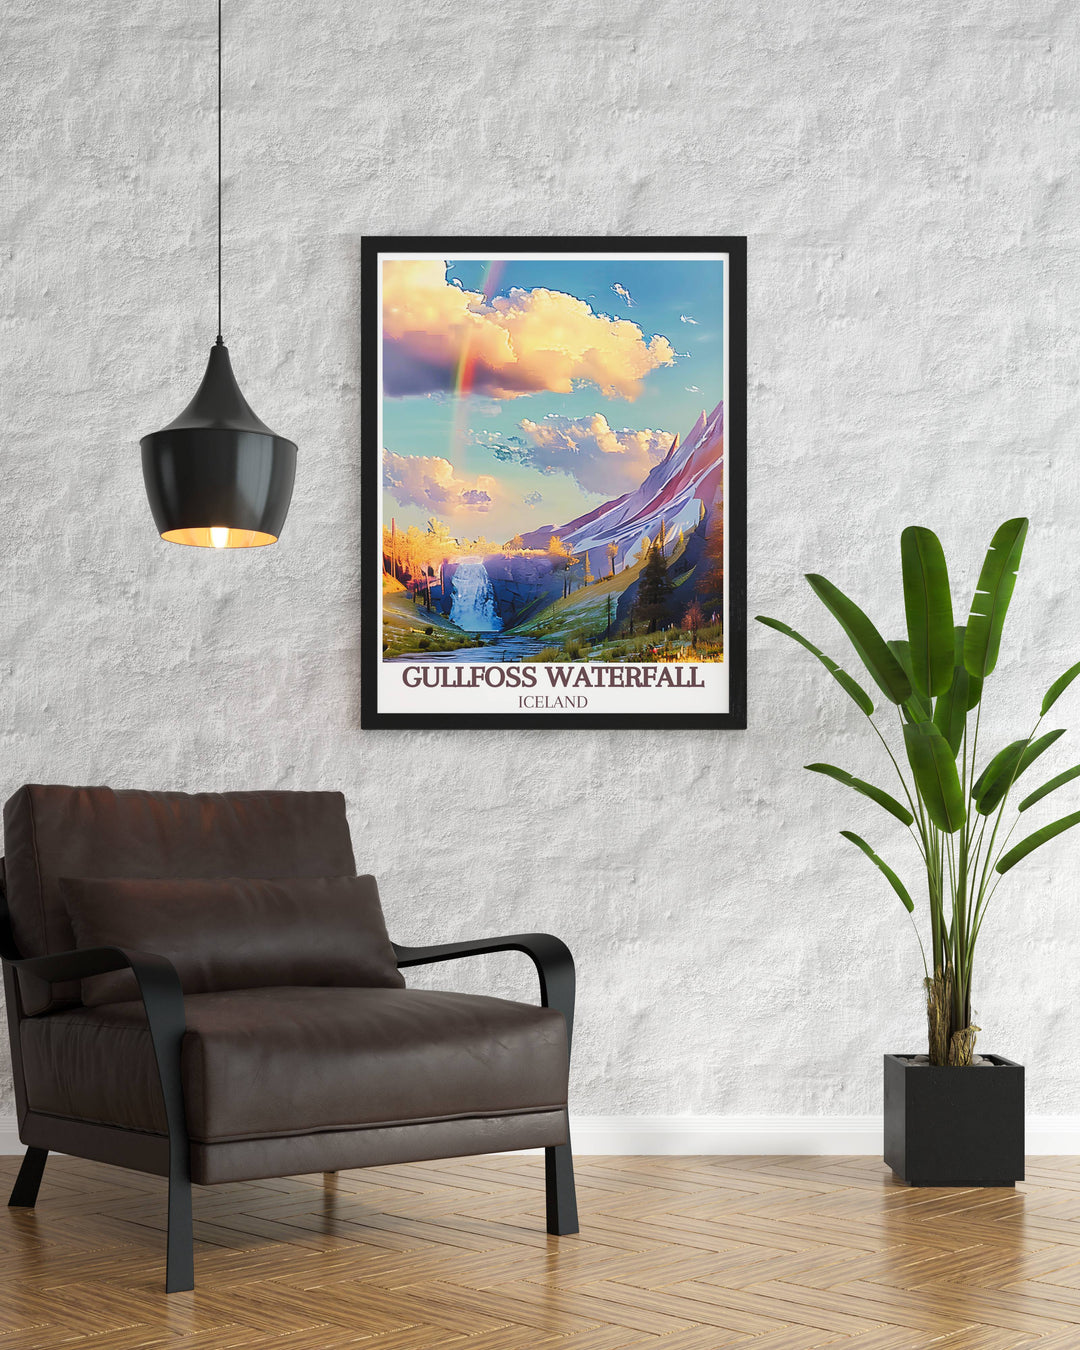 Gullfoss Waterfall and the rainbow seen from a unique angle, emphasizing the scale and beauty of the falls in an Icelandic landscape poster